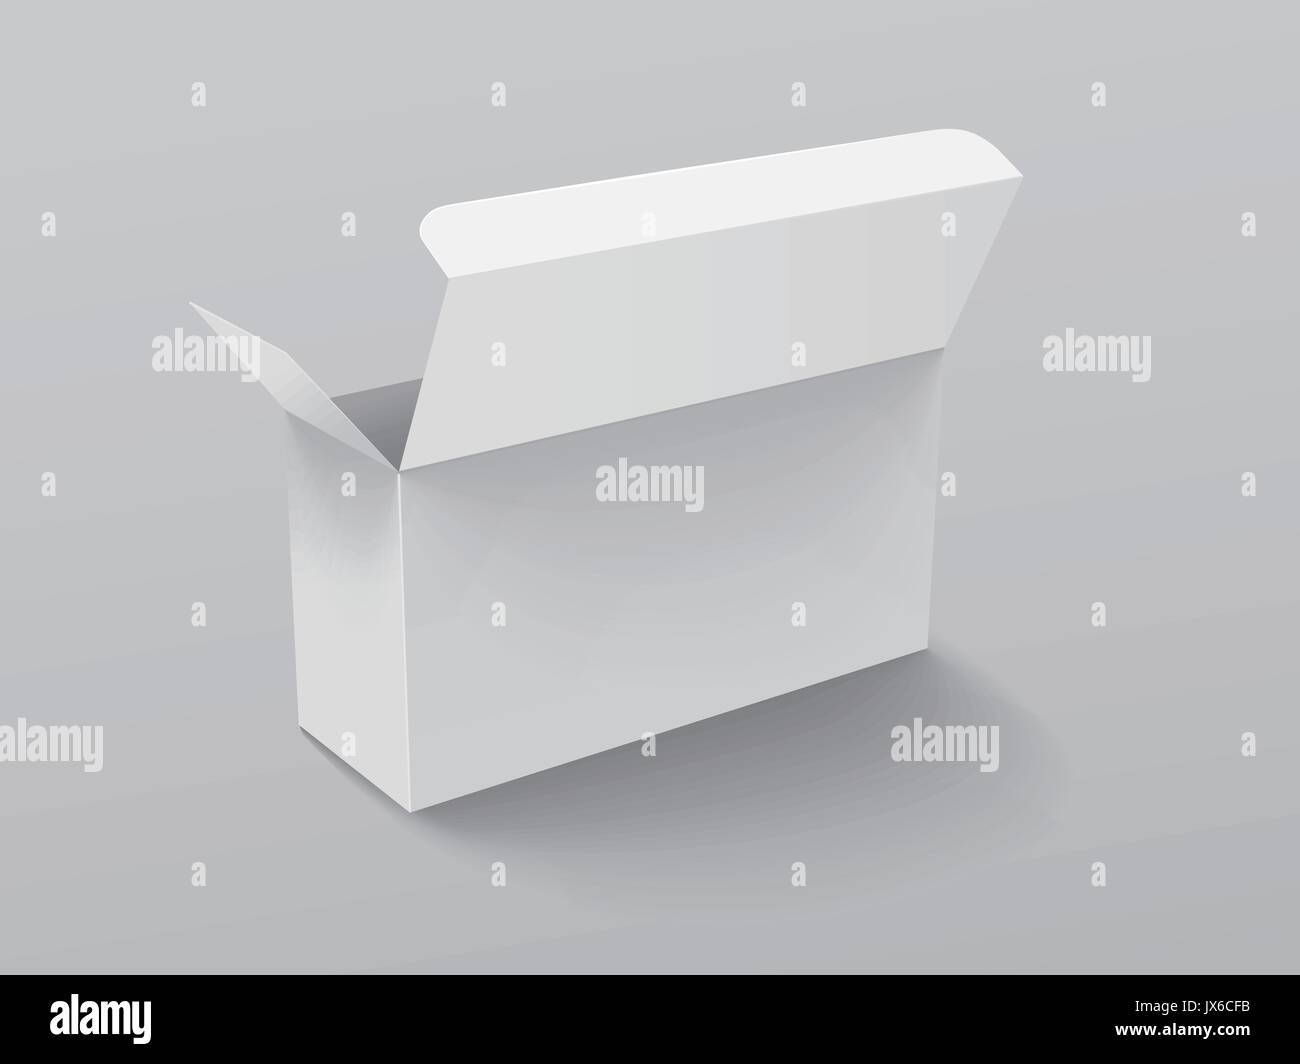 Download Roll End Tuck Front Box Mockup Blank Paper Box Template Design In 3d Illustration On Grey Background Stock Vector Image Art Alamy